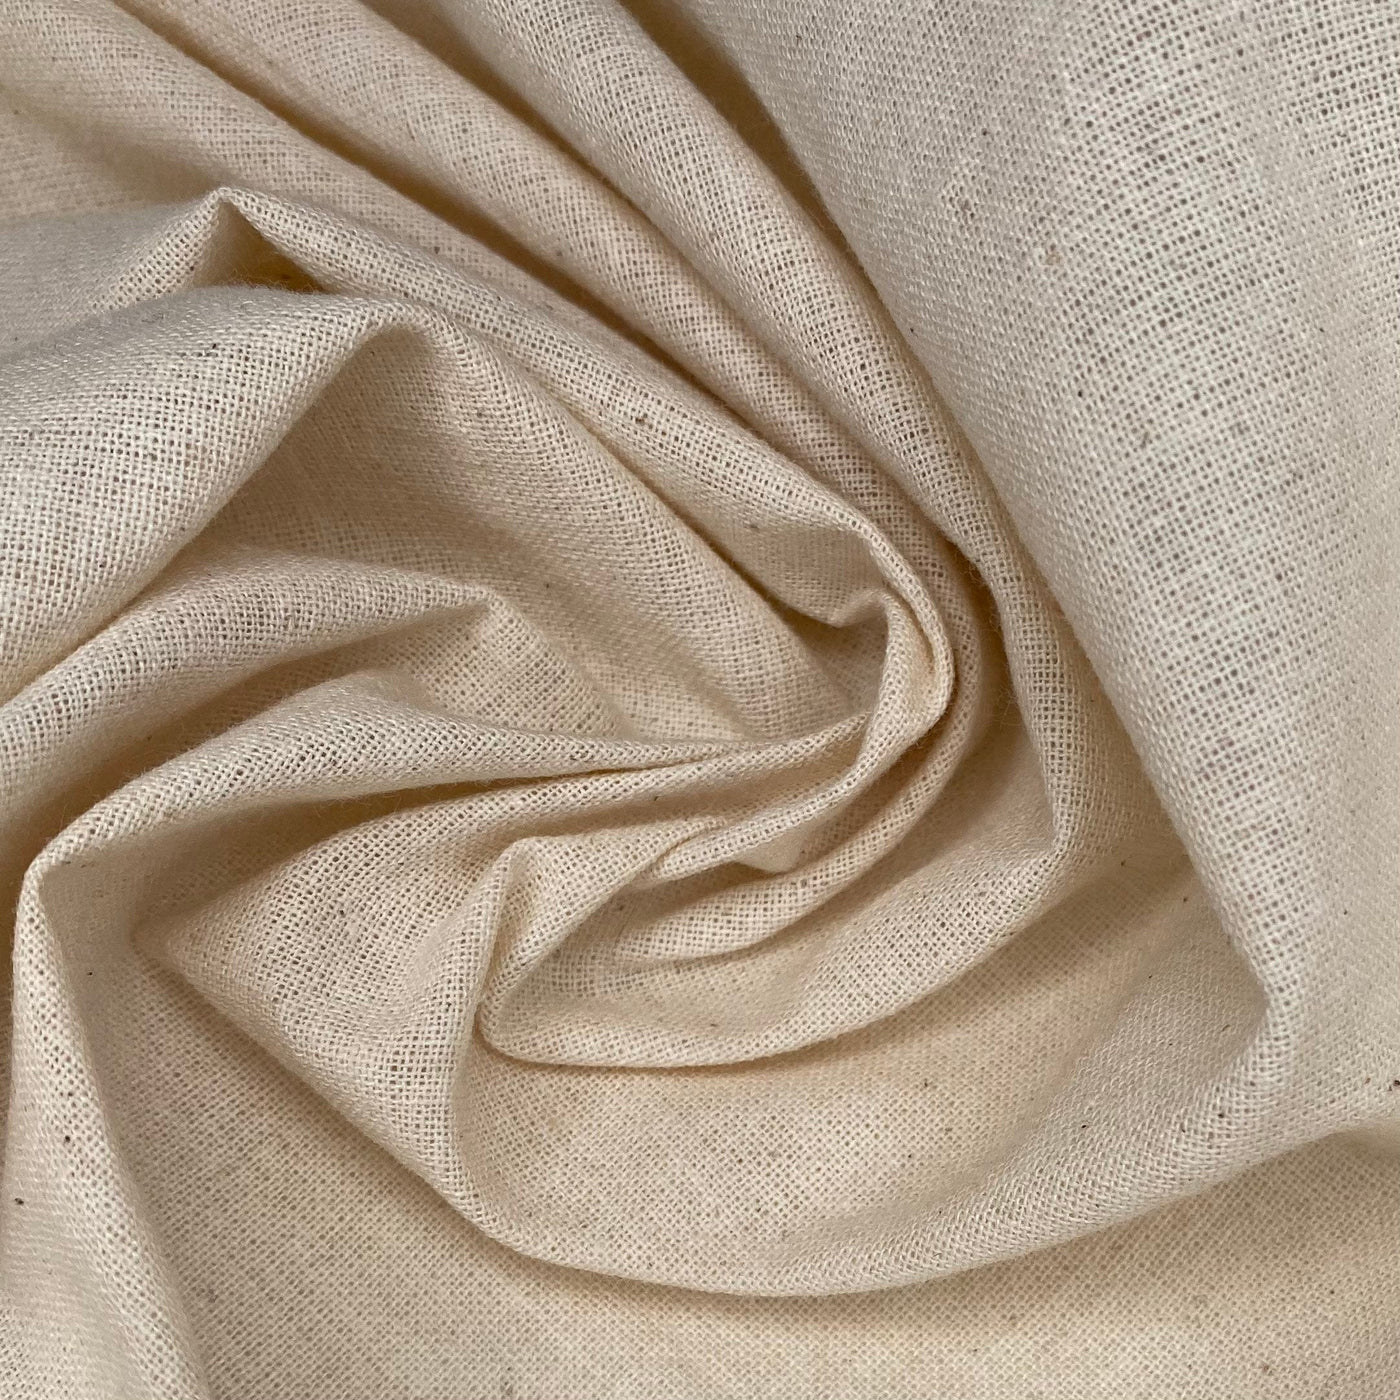 Unbleached Cotton Muslin Fabric, Textile Express